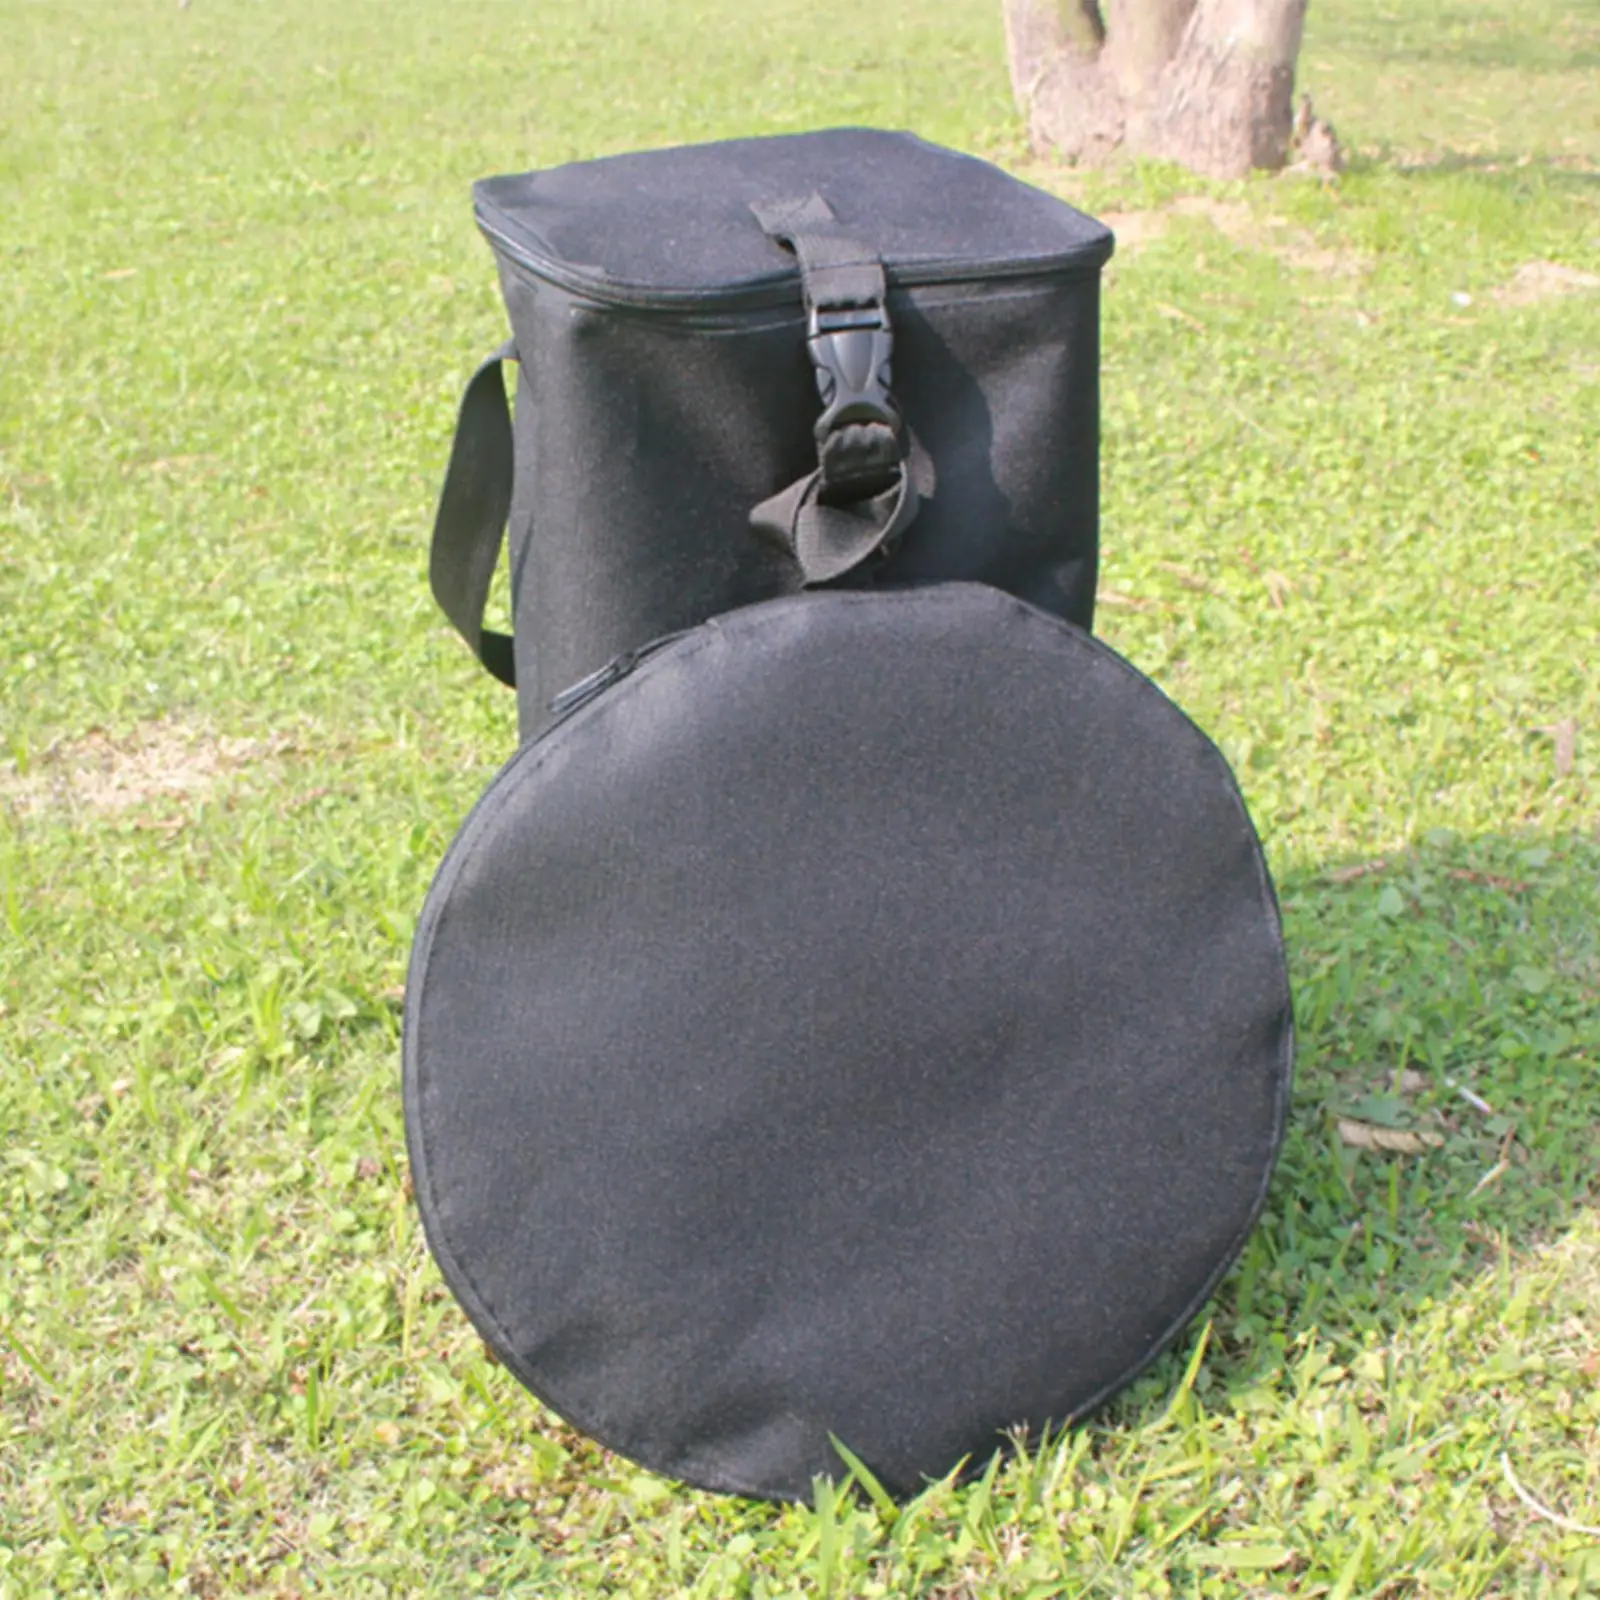 Gas Lantern Bag Camping Lamp Equipment Protection Bag for Fishing Outdoor